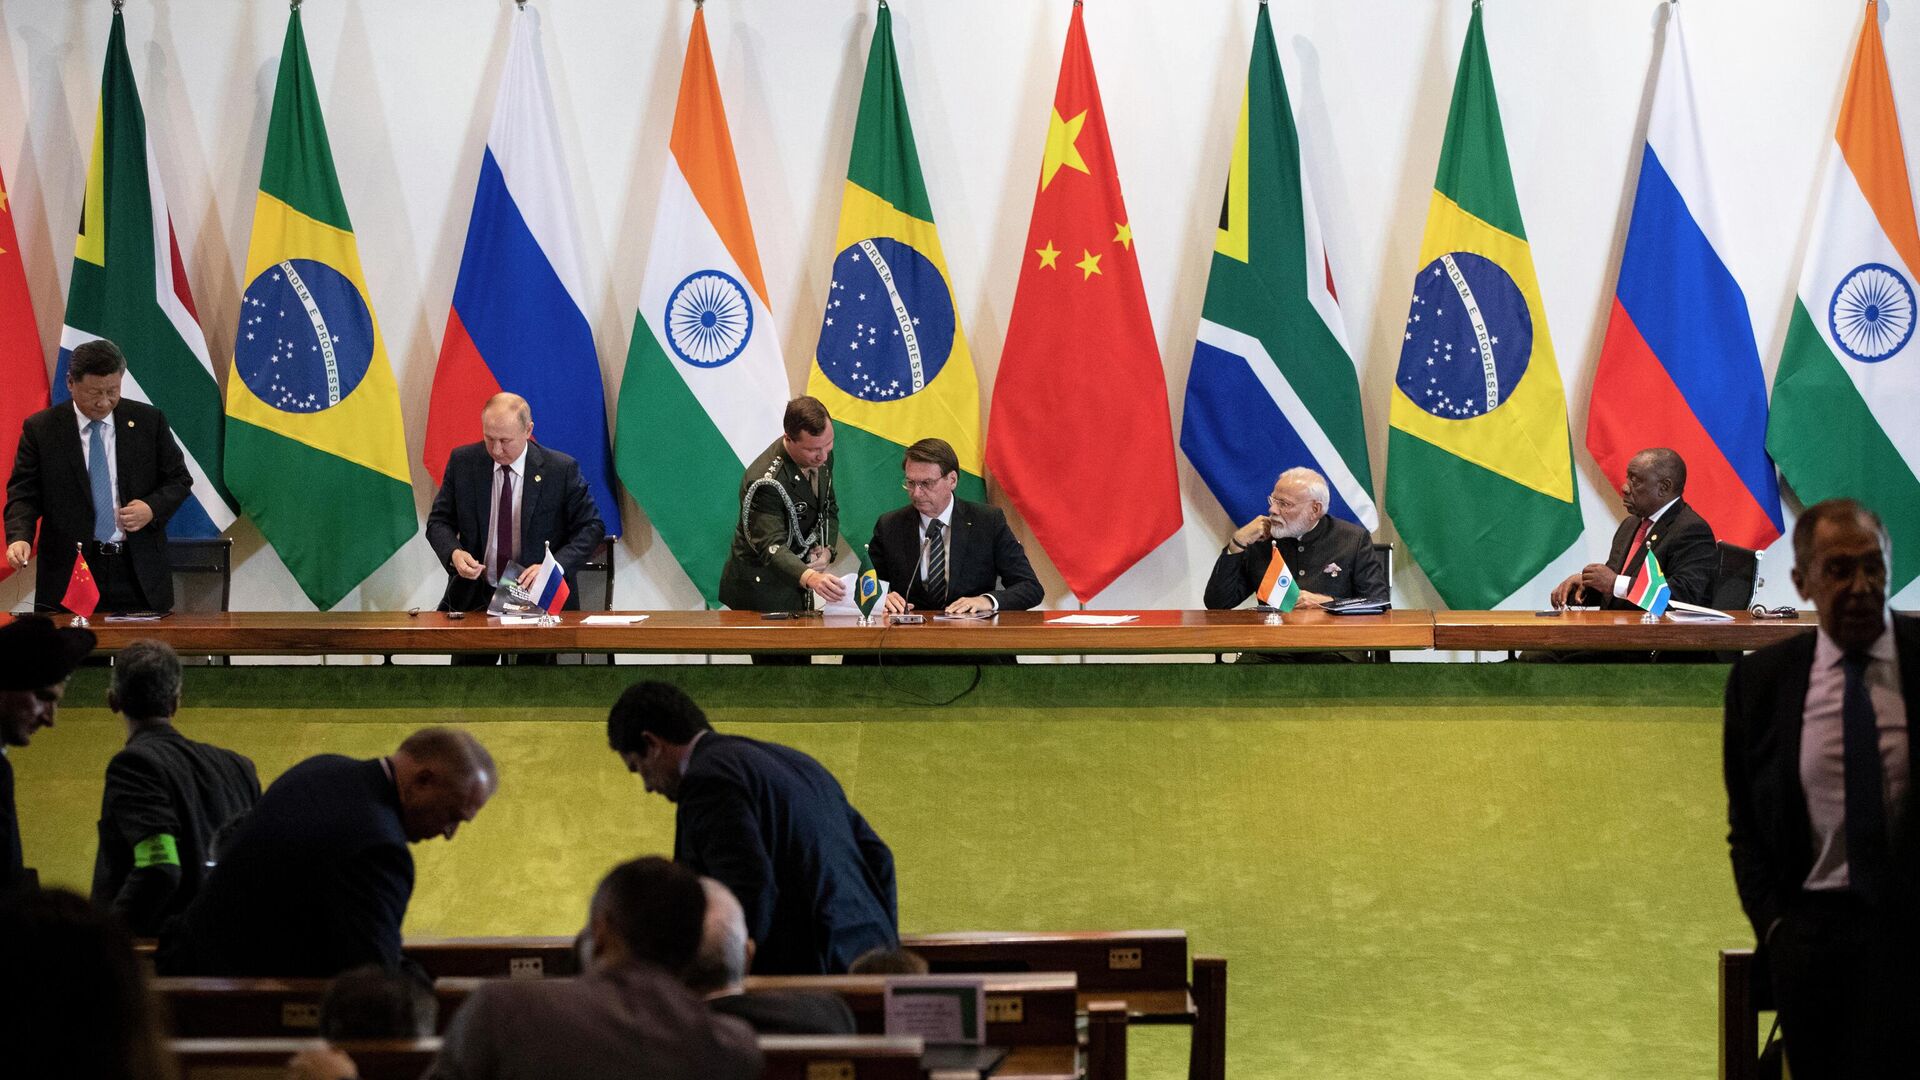 China's President Xi Jinping (L), Russia's President Vladimir Putin (2nd L), Brazil's President Jair Bolsonaro (C), India's Prime Minister Narendra Modi (2nd R), and South Africa's President Cyril Ramaphosa (R) attend to a meeting with members of the Business Council and management of the New Development Bank during the BRICS Summit in Brasilia, November 14, 2019. (Photo by Pavel Golovkin / POOL / AFP) - Sputnik International, 1920, 24.06.2022